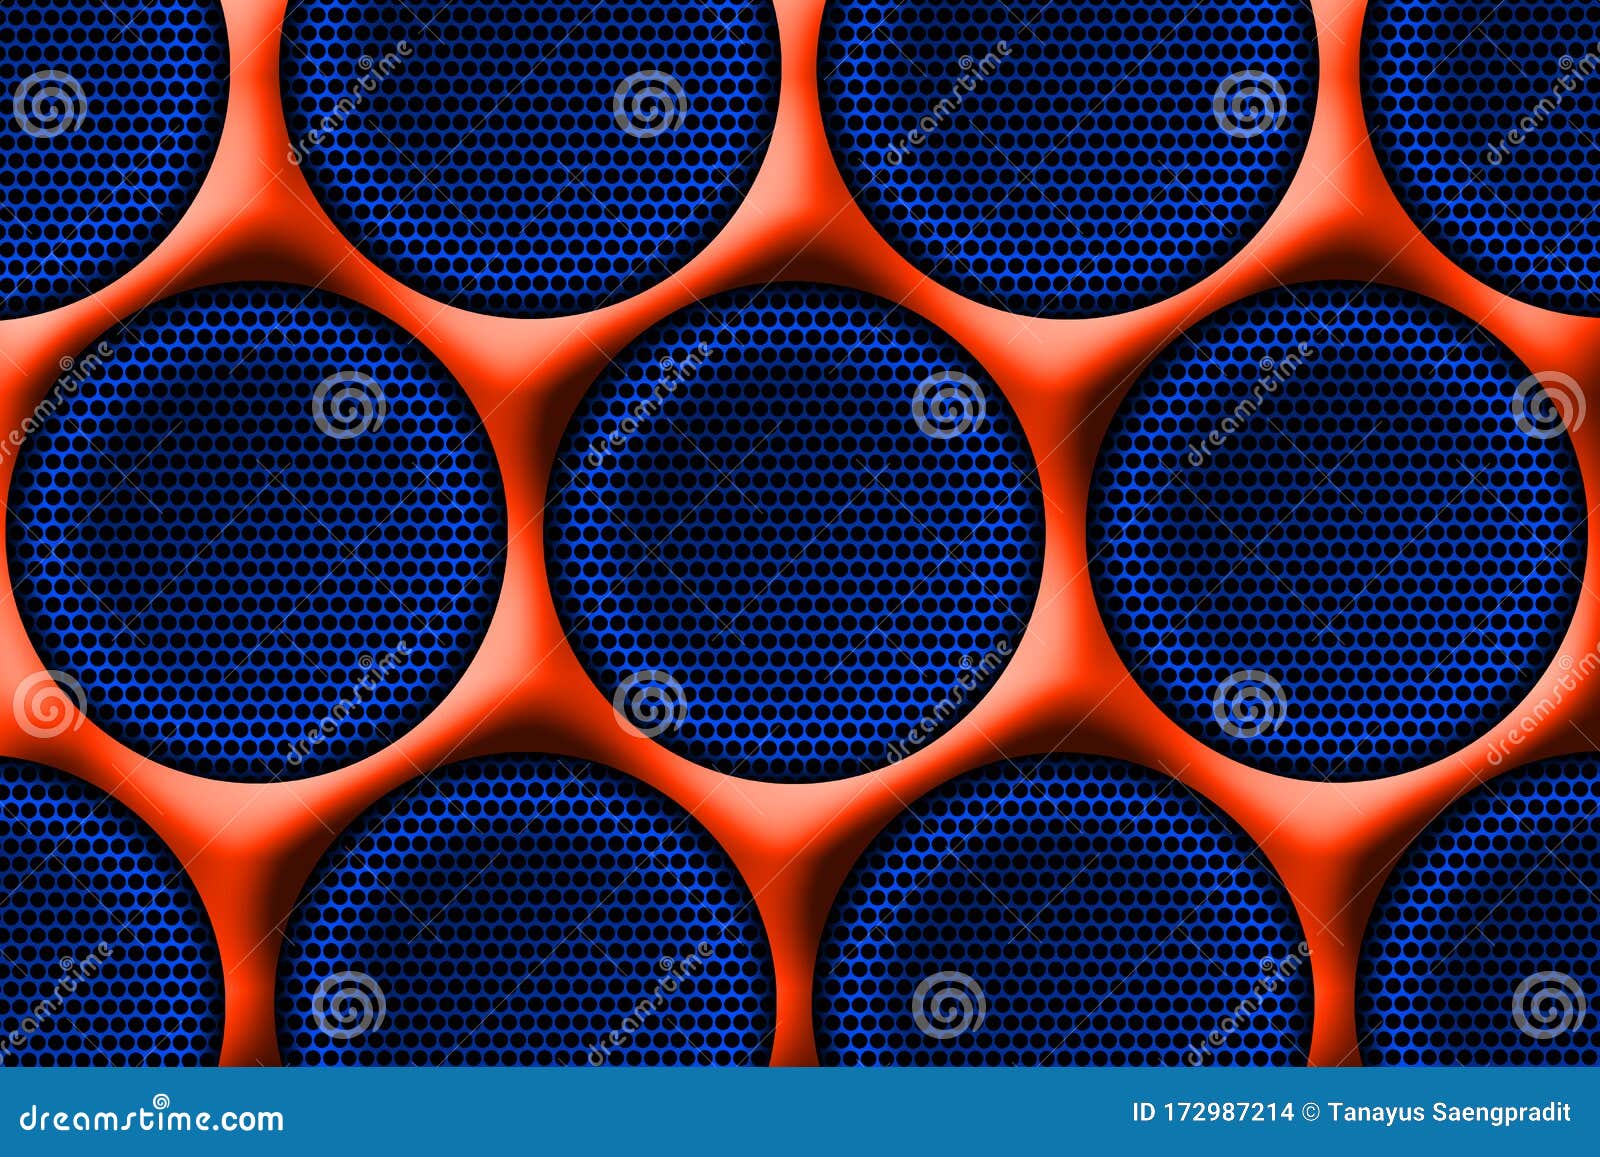 Orange And Blue Cell Metal Background And Texture 3d Illustration Design Stock Illustration Illustration Of Gradient Abstract 172987214